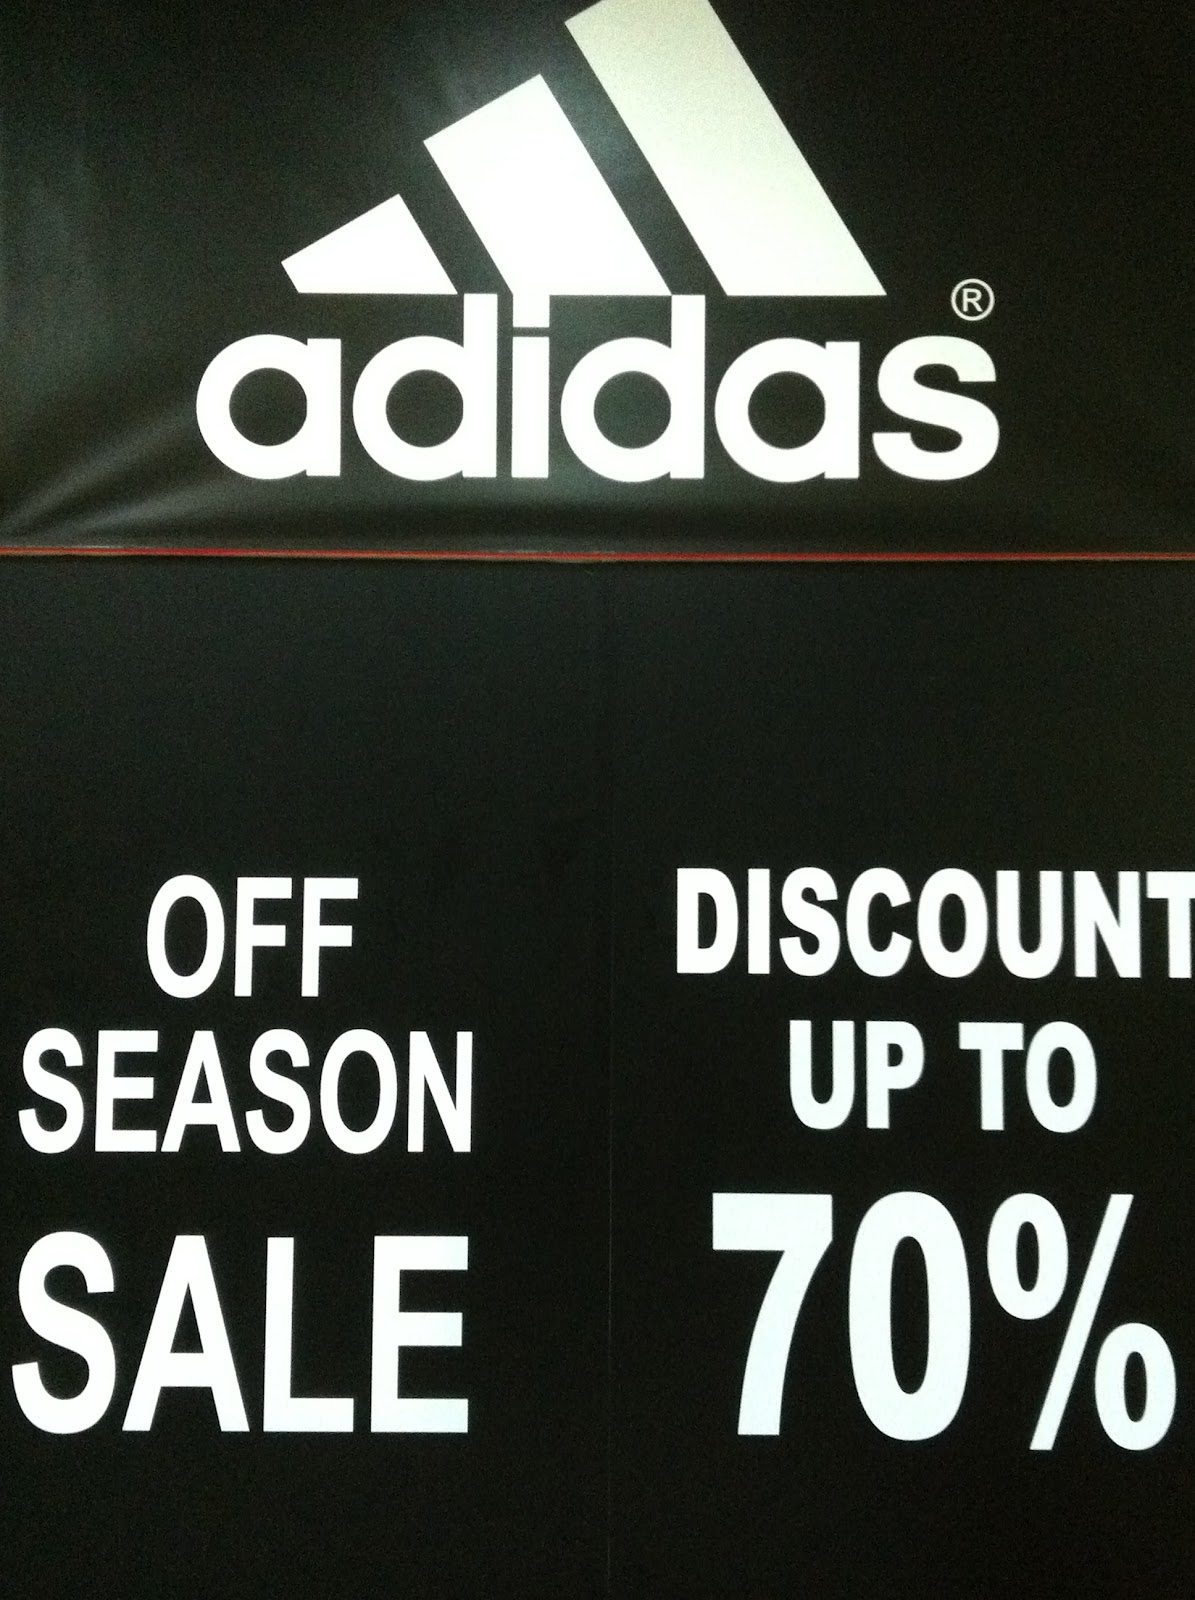 Happy Shopping Agency: Adidas Off Season Sales up to 70%